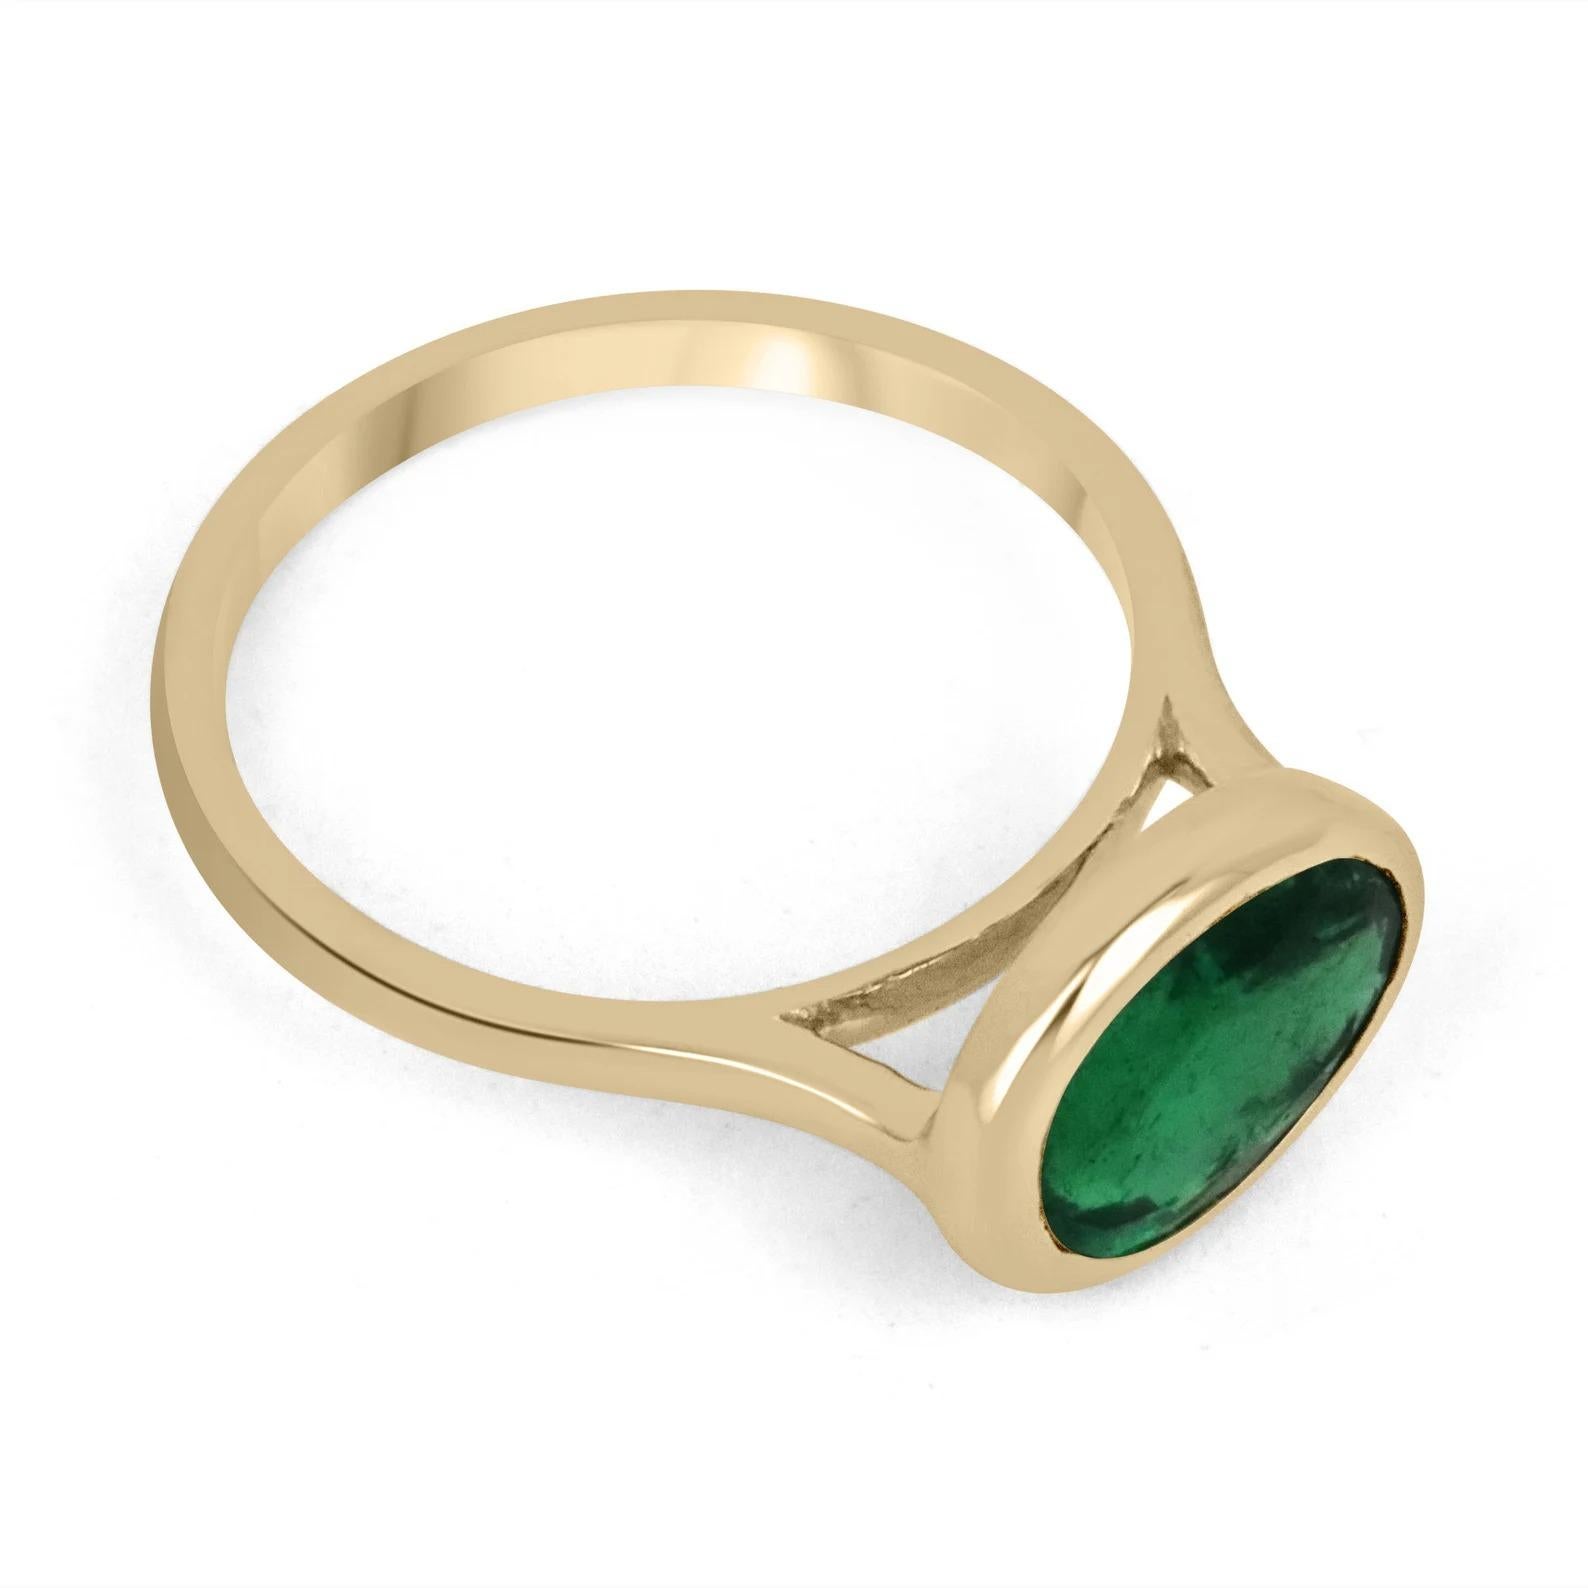 Displayed is a vivid dark forest green emerald, solitaire, oval cut bezel ring in 18K yellow gold. This gorgeous solitaire ring carries a full rare 2.75-carat emerald in a sleek bezel setting. The emerald has very good clarity and remarkable luster.